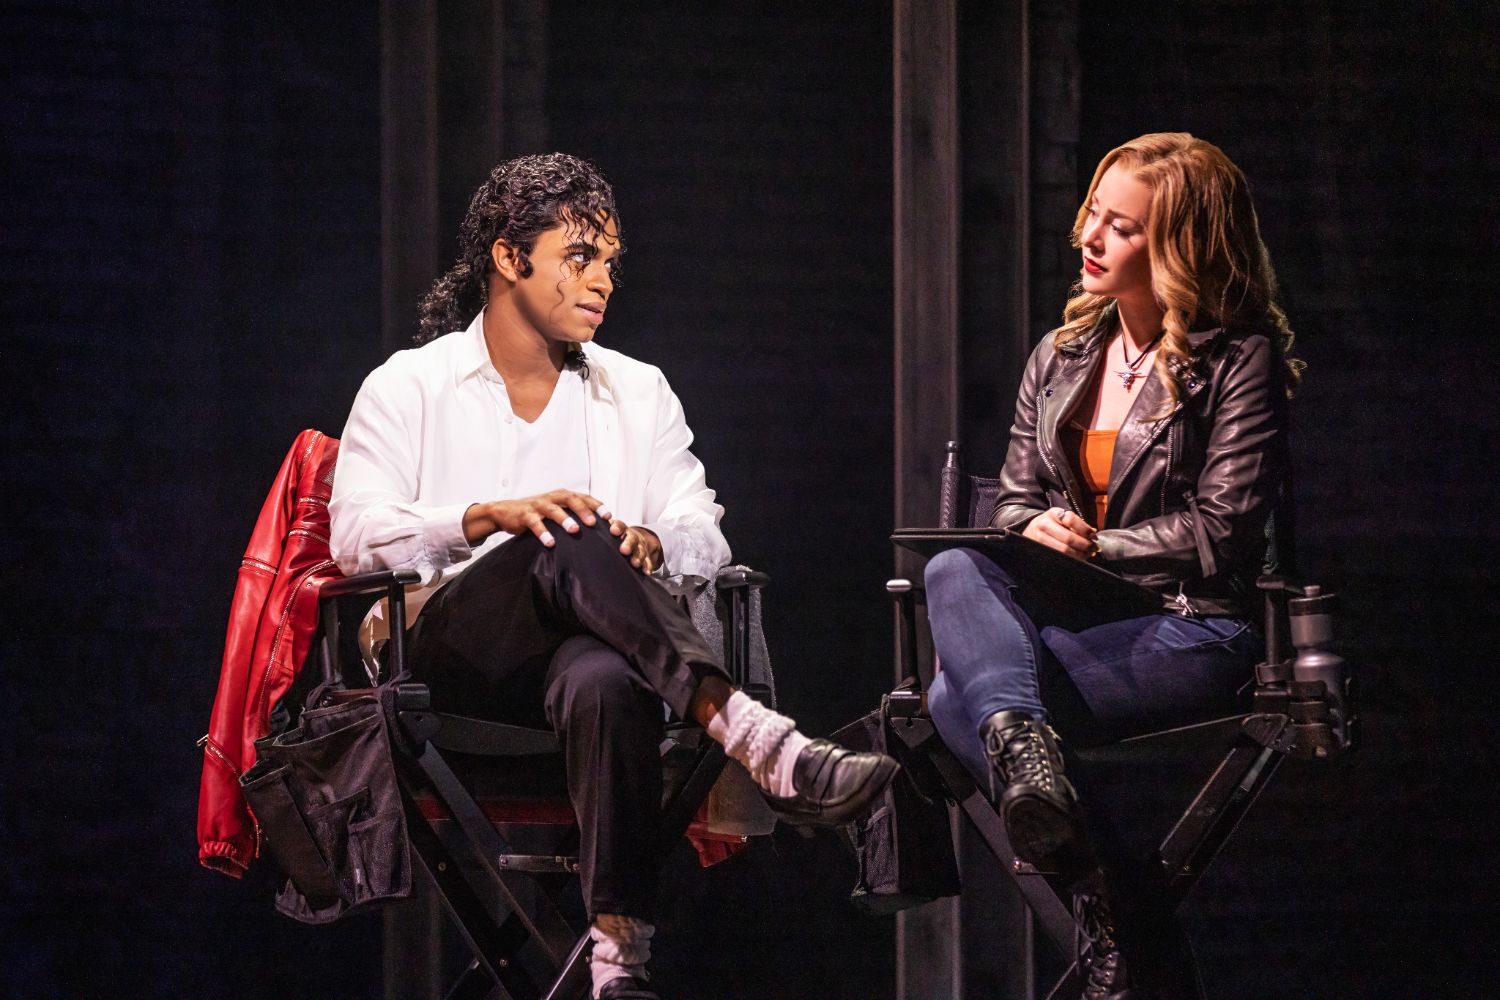 PHOTO: Matthew Murphy | The South Pasadenan | Roman Banks as Michael Jackson and Mary Kate Moore as Rachel (an MTV interviewer) in MJ The Musical national tour.